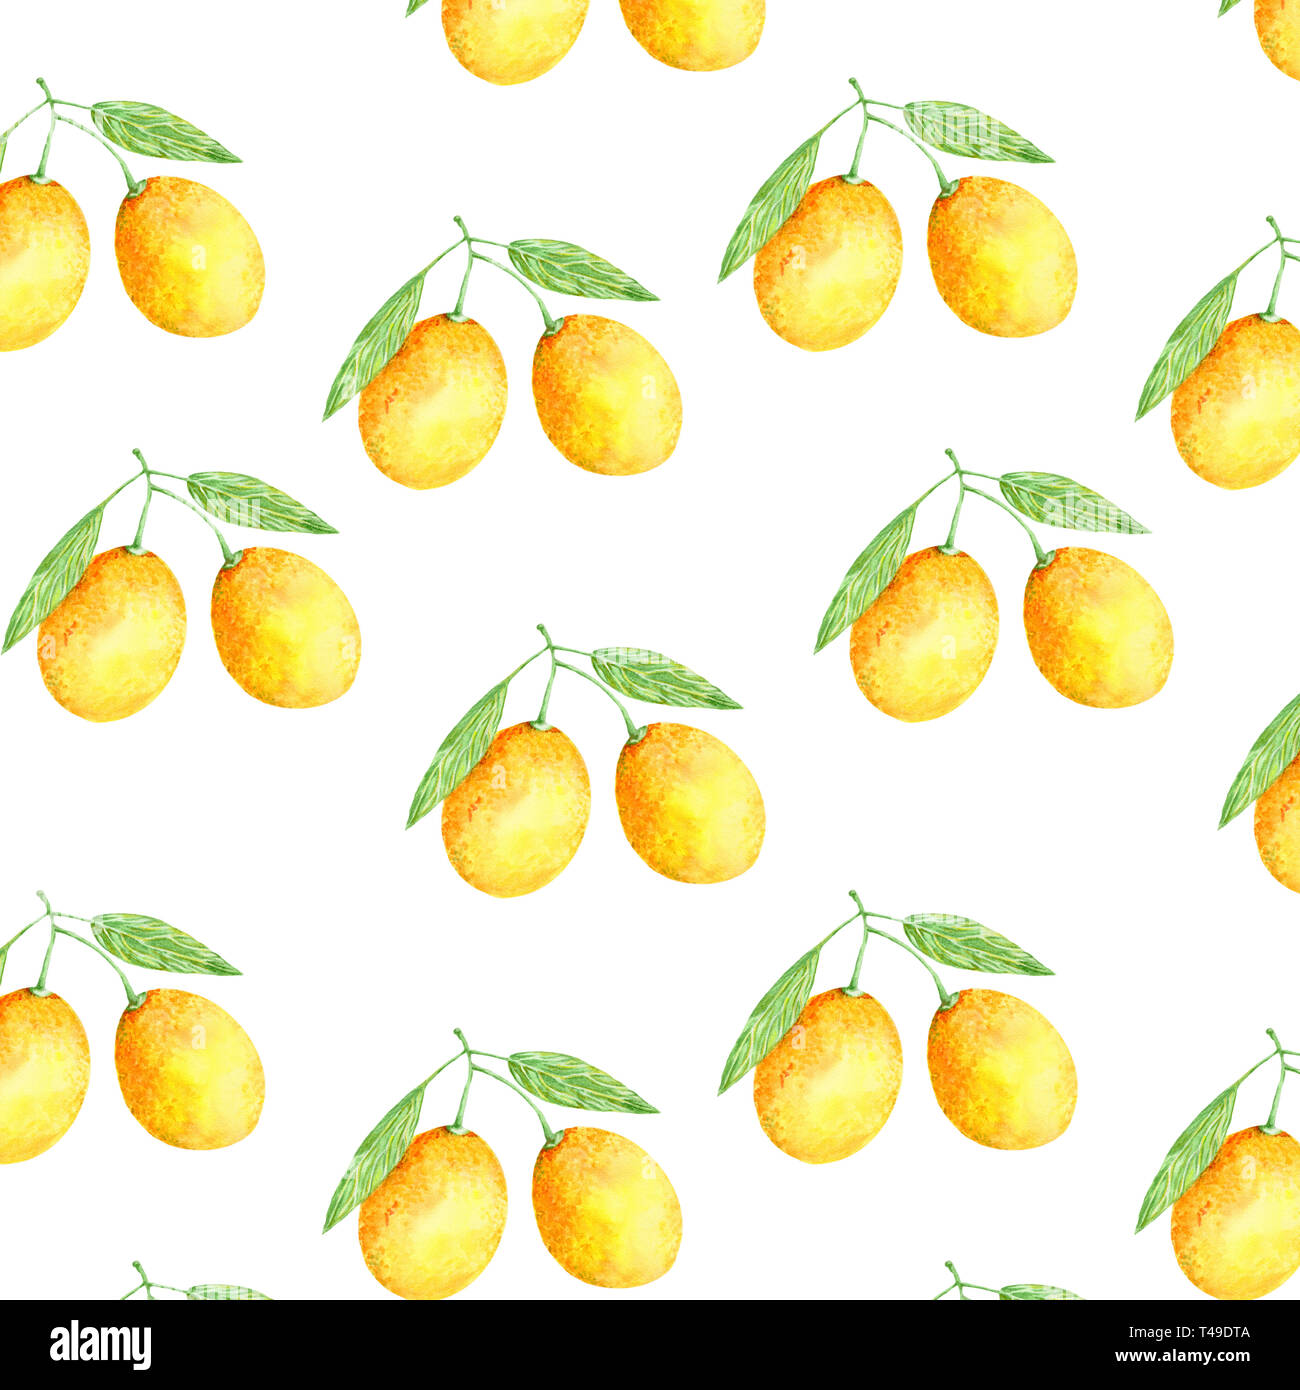 Watercolor Orange Fruit Fresh Illustration Painting Hand Drawn Art Color Juicy Element On White Background Stock Photo Alamy,Black And White Wallpaper Bathroom